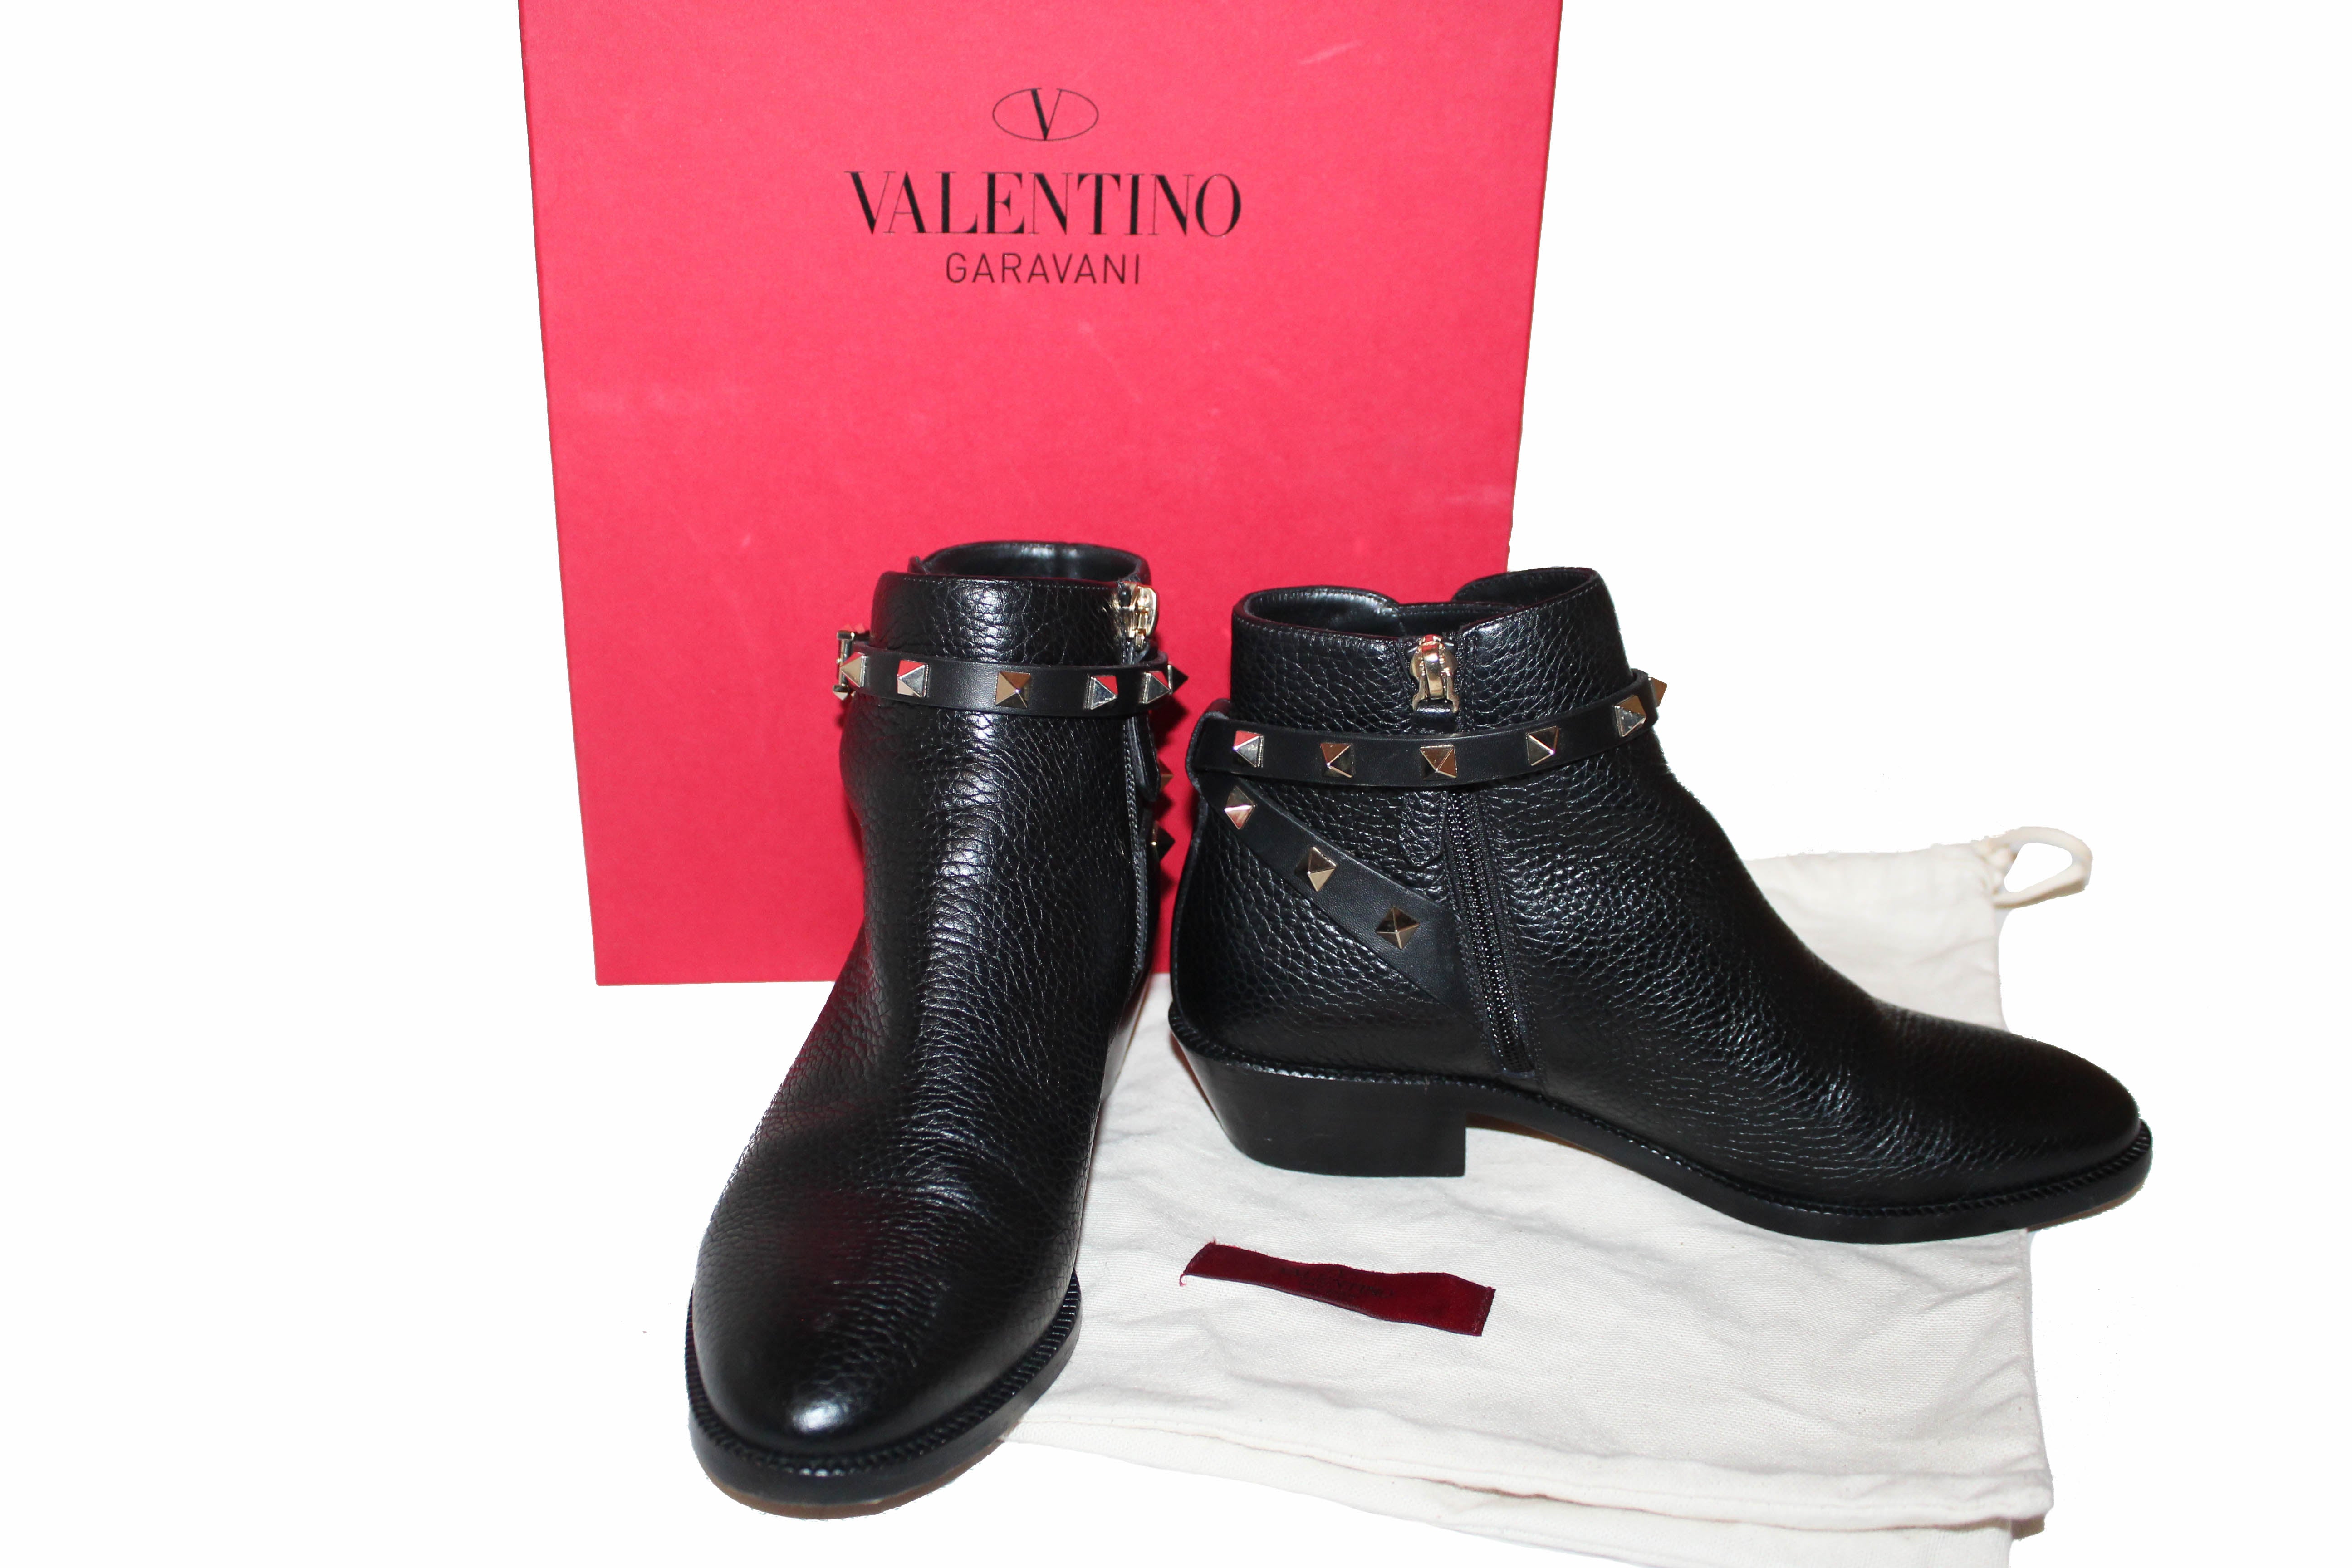 Authentic Valentino Black Leather Rockstud Grainy Calfskin Ankle Boots Shoes Size 36